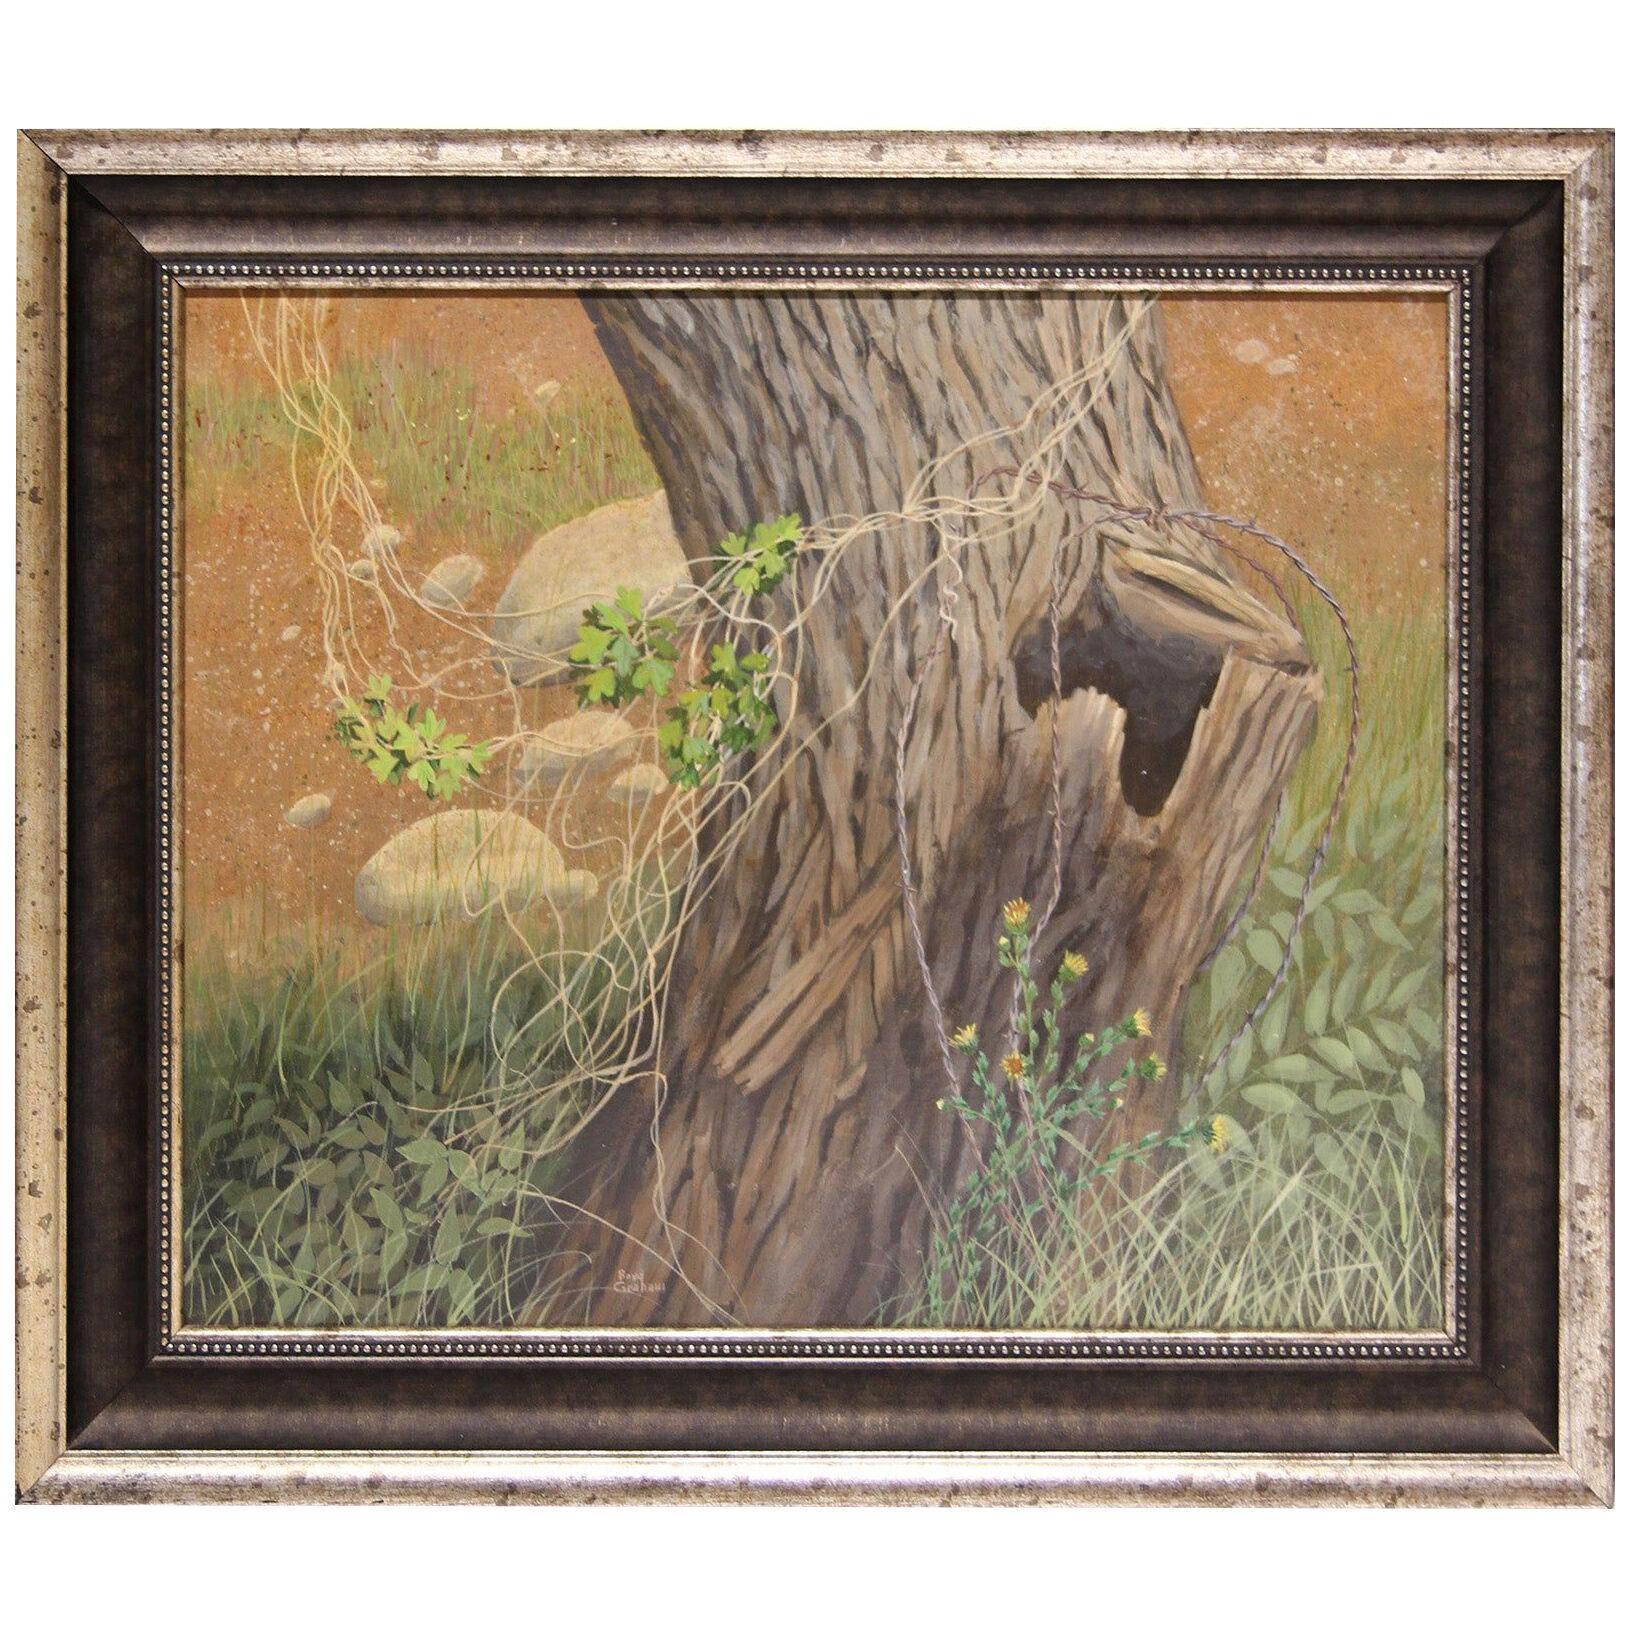 Modern Realist Pastoral Still Life / Landscape Tree Stump & Barbed Wire Painting